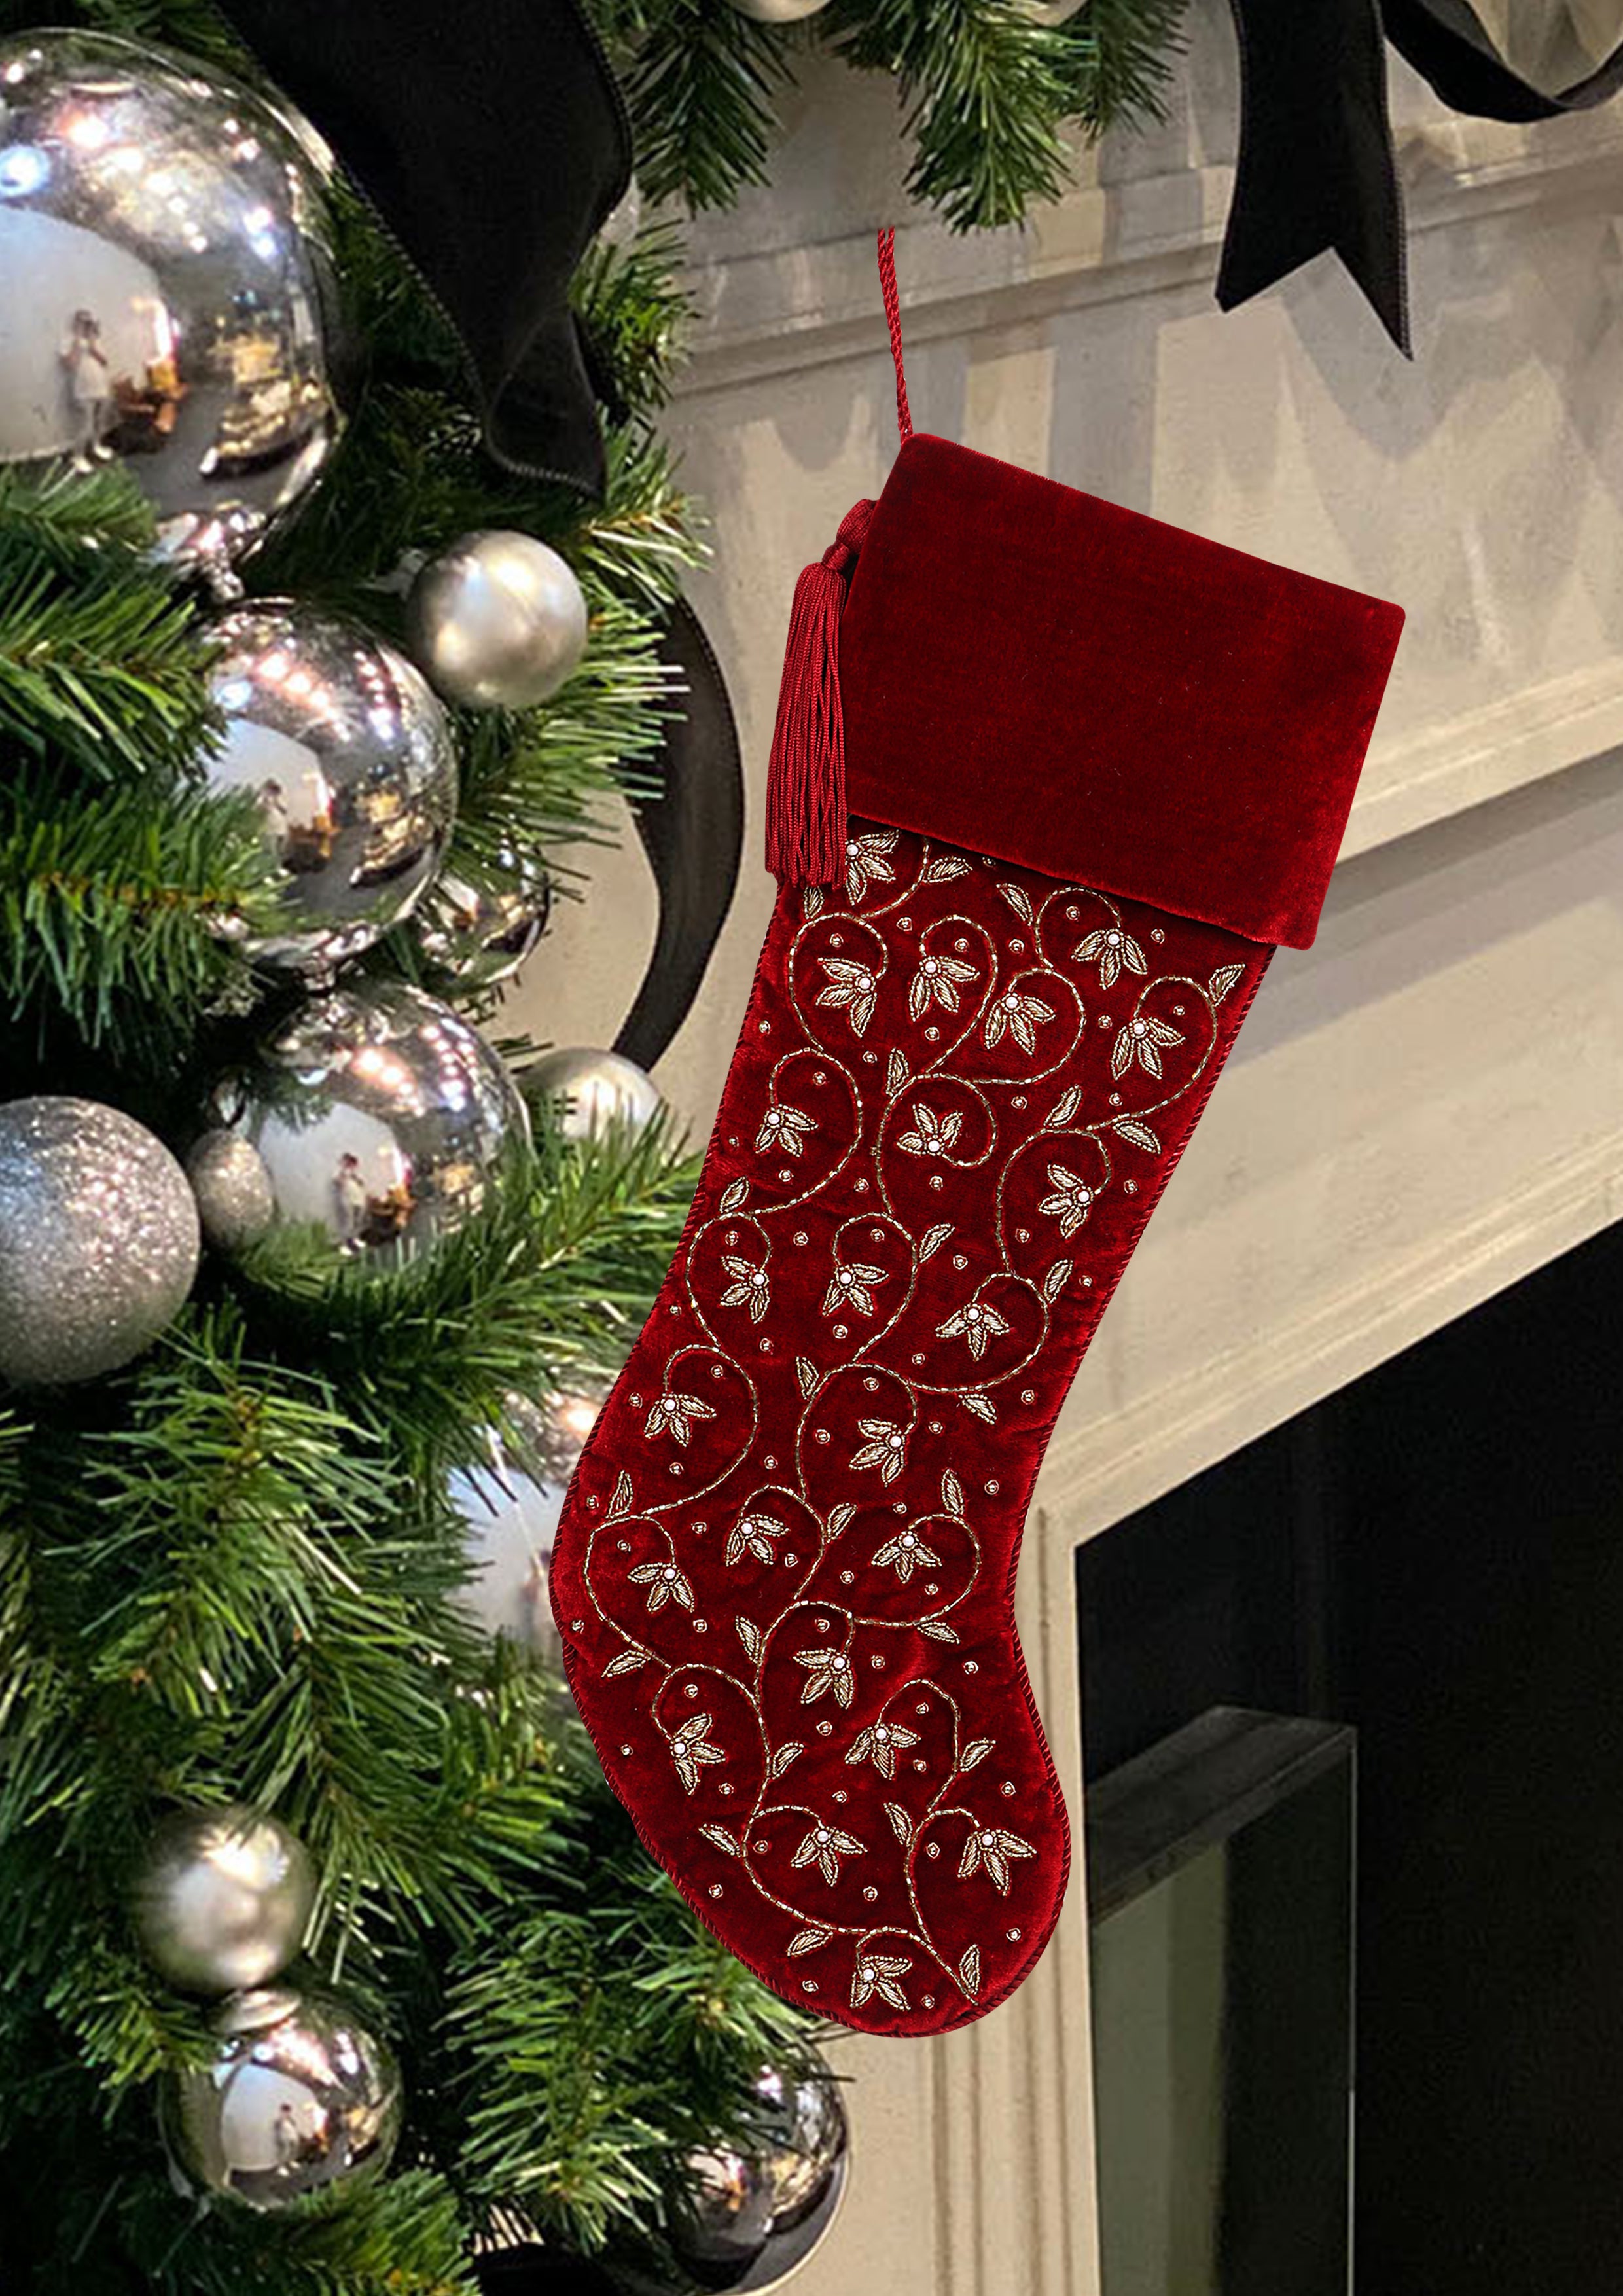 Personalised Intricate leaf Christmas Stocking- Red Velvet Christmas stocking Embroided with intricate leaf